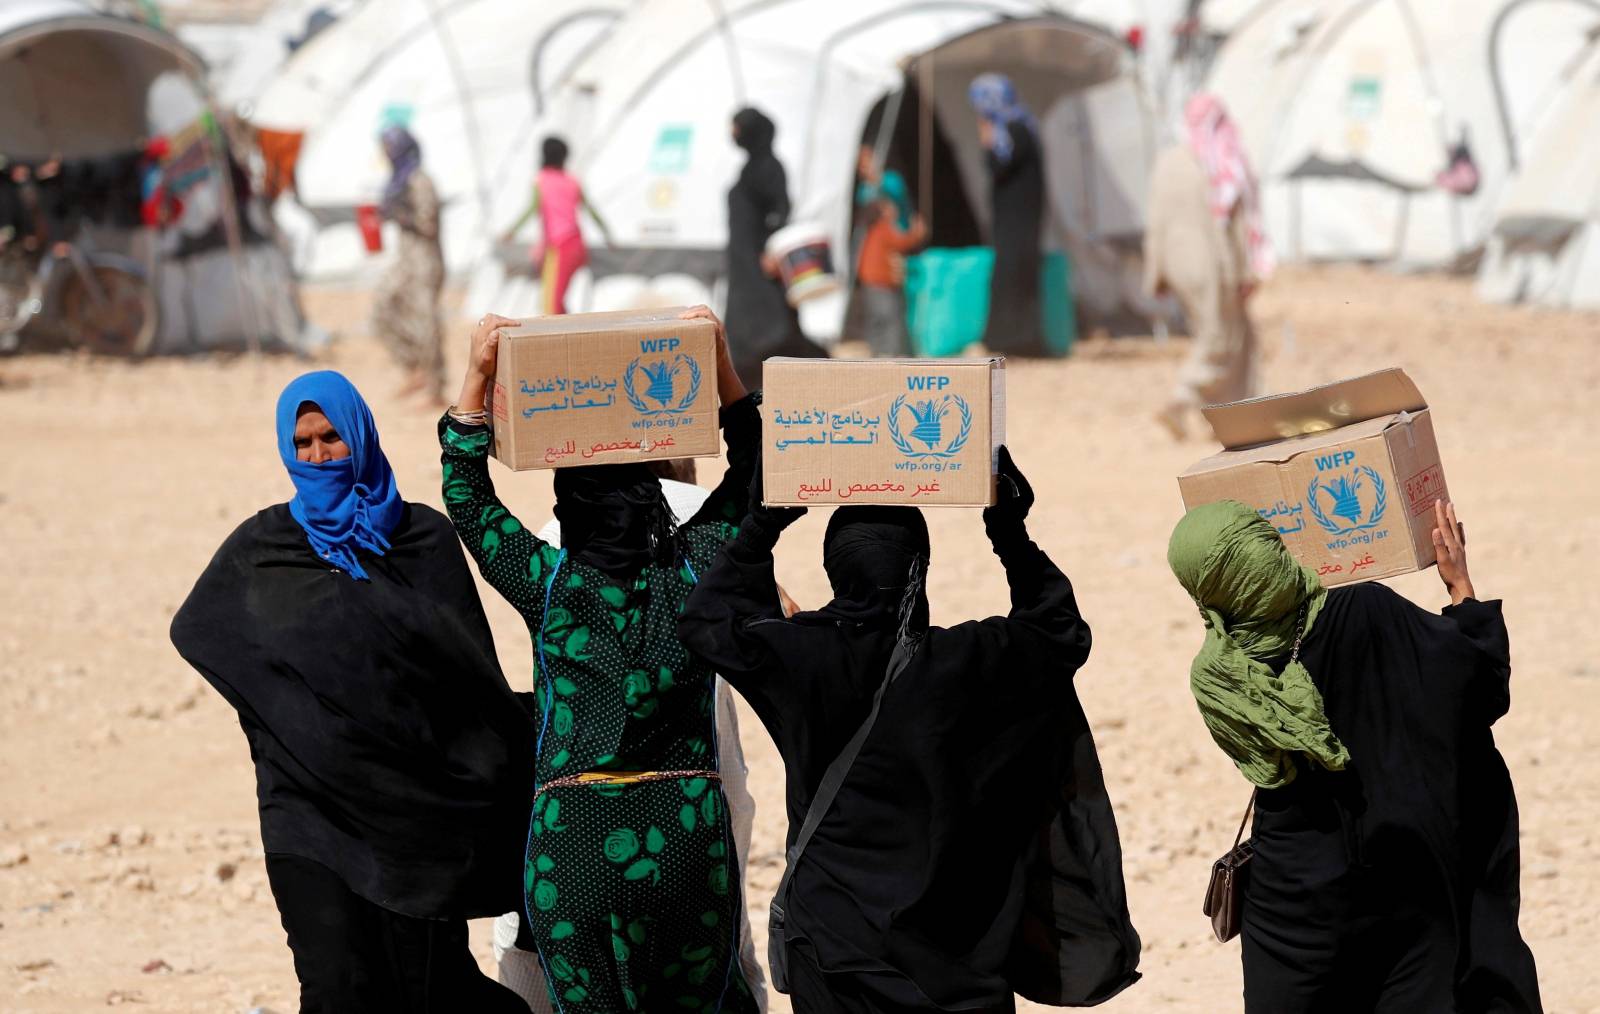 FILE PHOTO: People displaced from fightings between the Syrian Democratic Forces and Islamic State militants carry boxes of food aid given by UN's World Food Programme at a refugee camp in Ain Issa